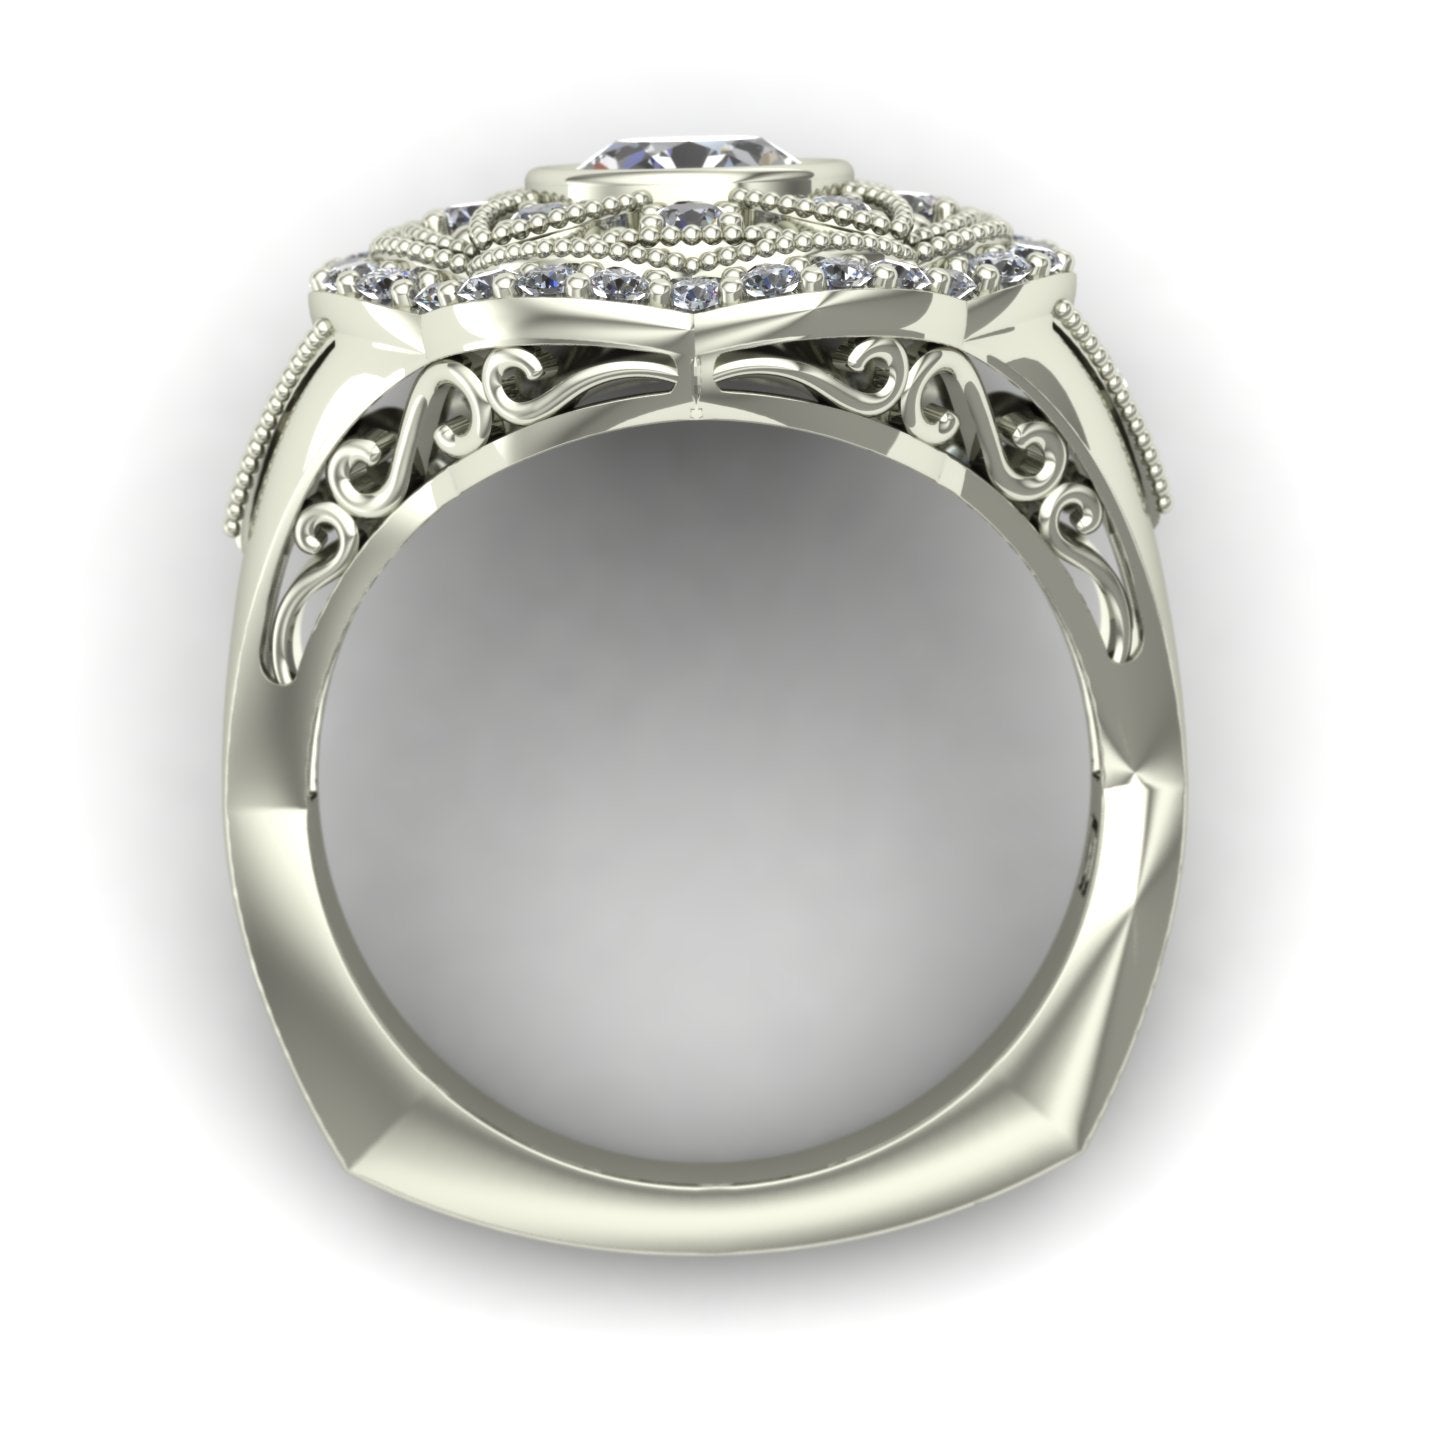 three quarter carat bezel set diamond right hand ring with a vintage look in 14k white gold - Charles Babb Designs - through finger view